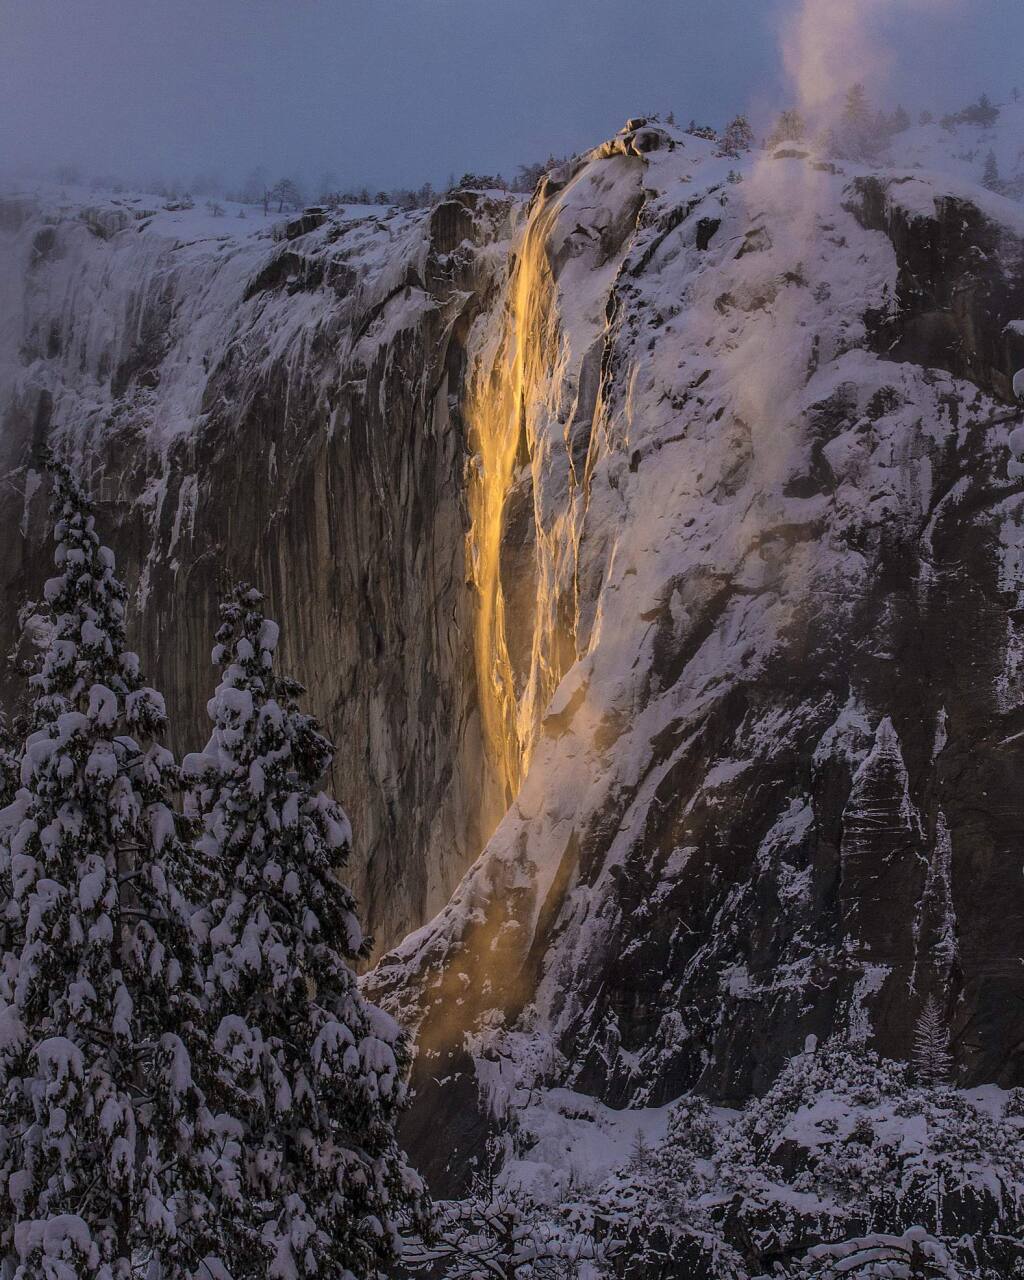 Yosemite S Firefall Glow Lasts Only 2 Weeks Here S How To See It